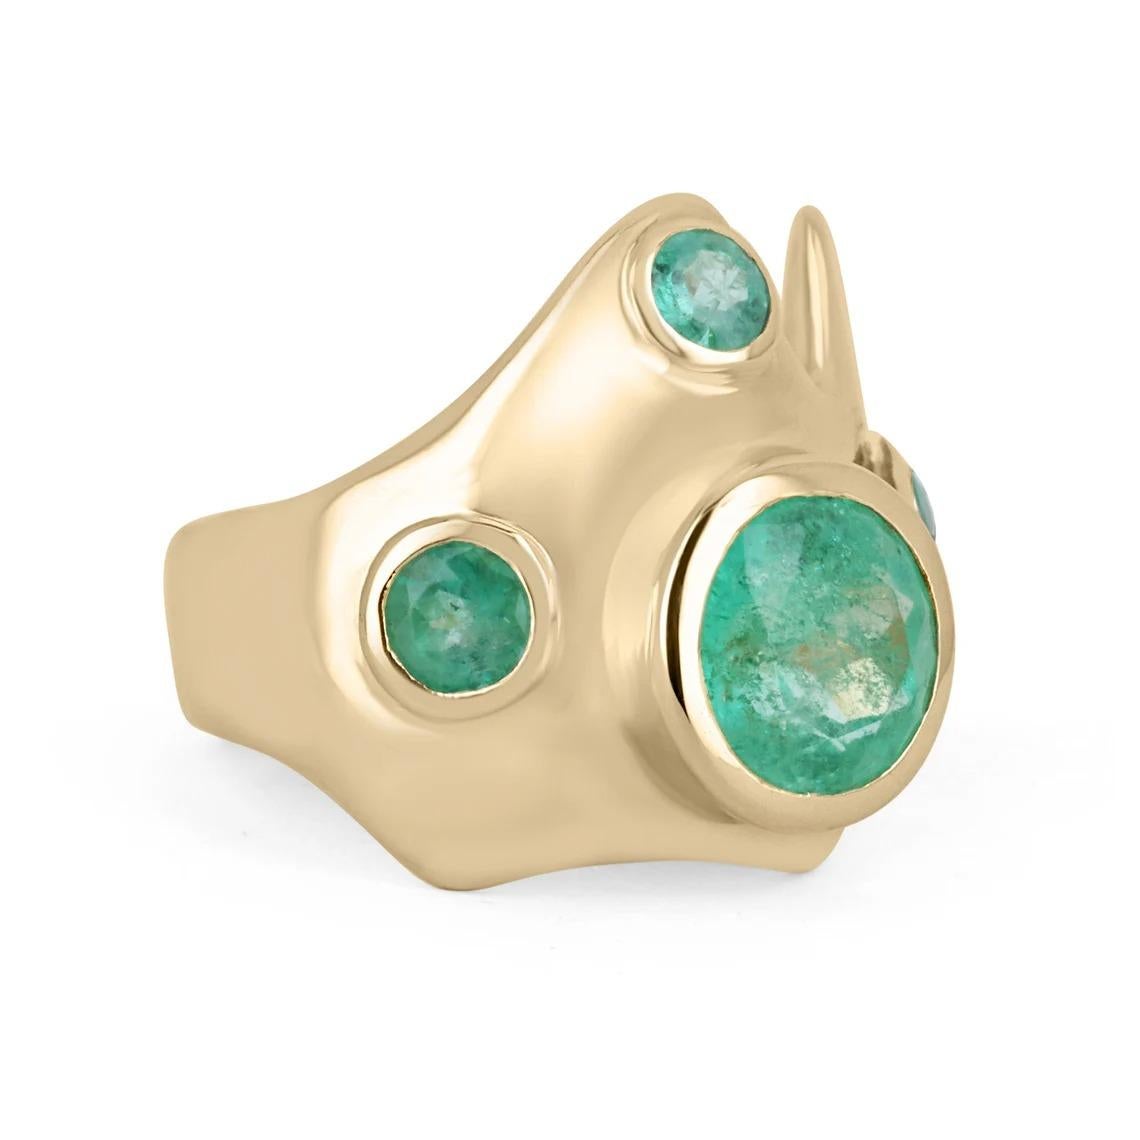 Take a glimpse, at this extraordinary funky Colombian emerald ring. The center stone, which is the largest emerald showcased is a whopping 2.30-carats, and displays a beautiful spring green color, with remarkable characteristics. Accenting the